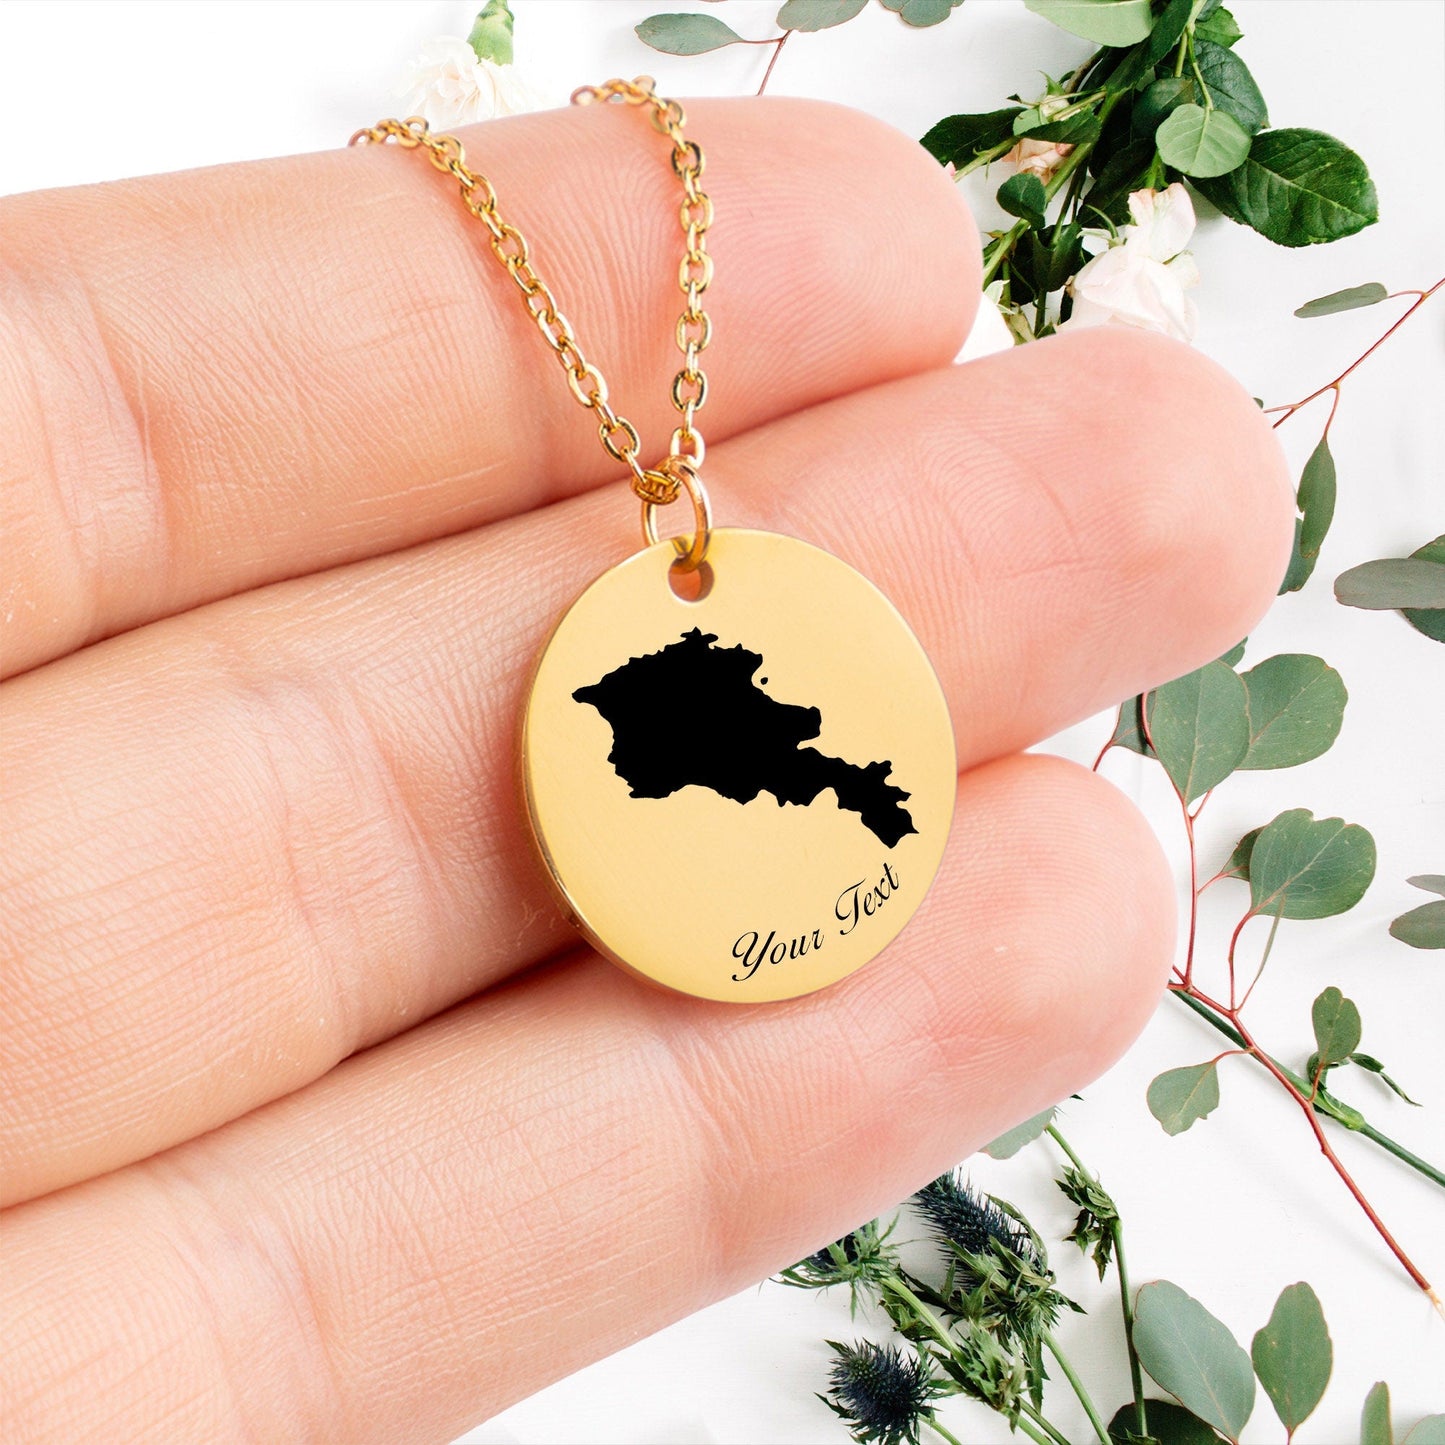 Armenia Country Map Necklace, Your Name Necklace, Minimalist Necklace, Personalized Gift, Silver Necklace, Gift For Him Her